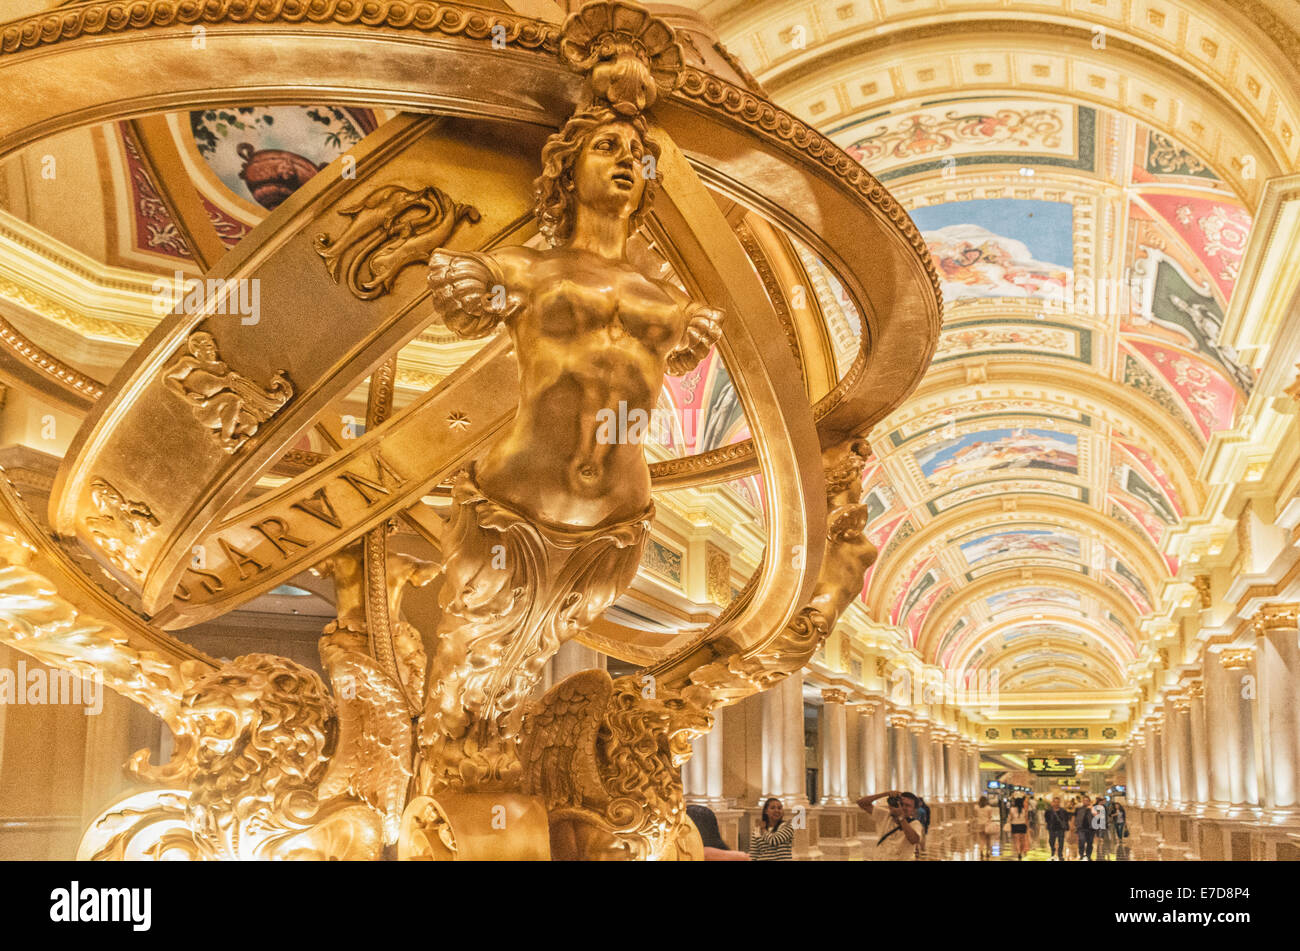 MACAU, CHINA - CIRCA AUG, 2013 : The Venetian Macao resort hotel, Macao, one of the largest hotel and casino in the world. Stock Photo